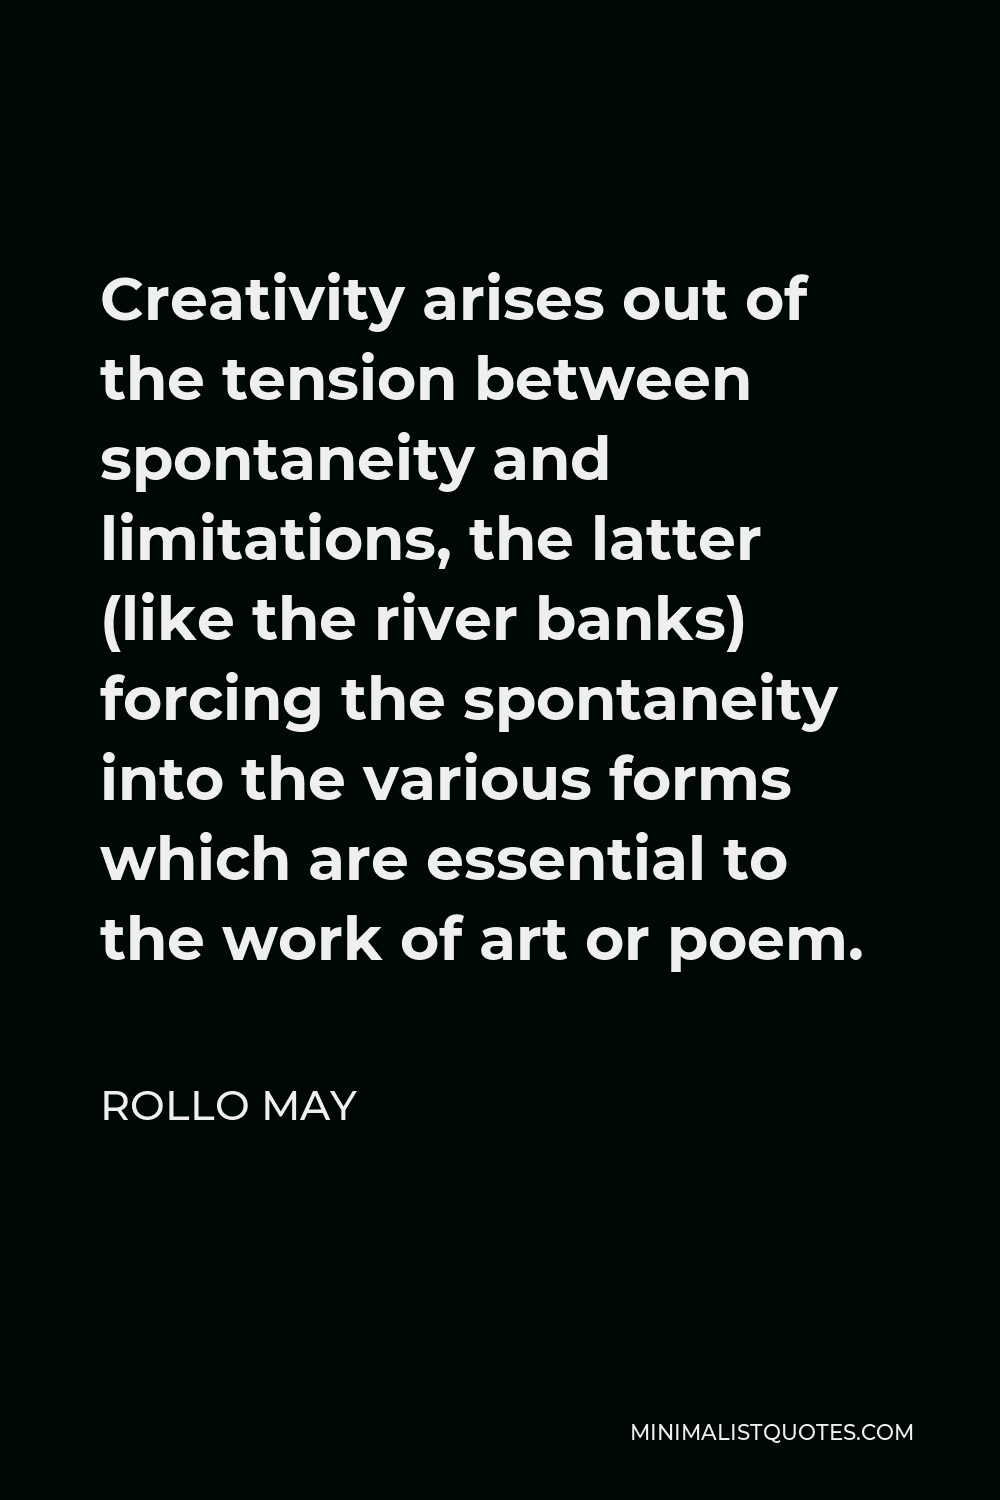 Rollo May Quote - Creativity arises out of the tension between spontaneity and limitations, the latter (like the river banks) forcing the spontaneity into the various forms which are essential to the work of art or poem.